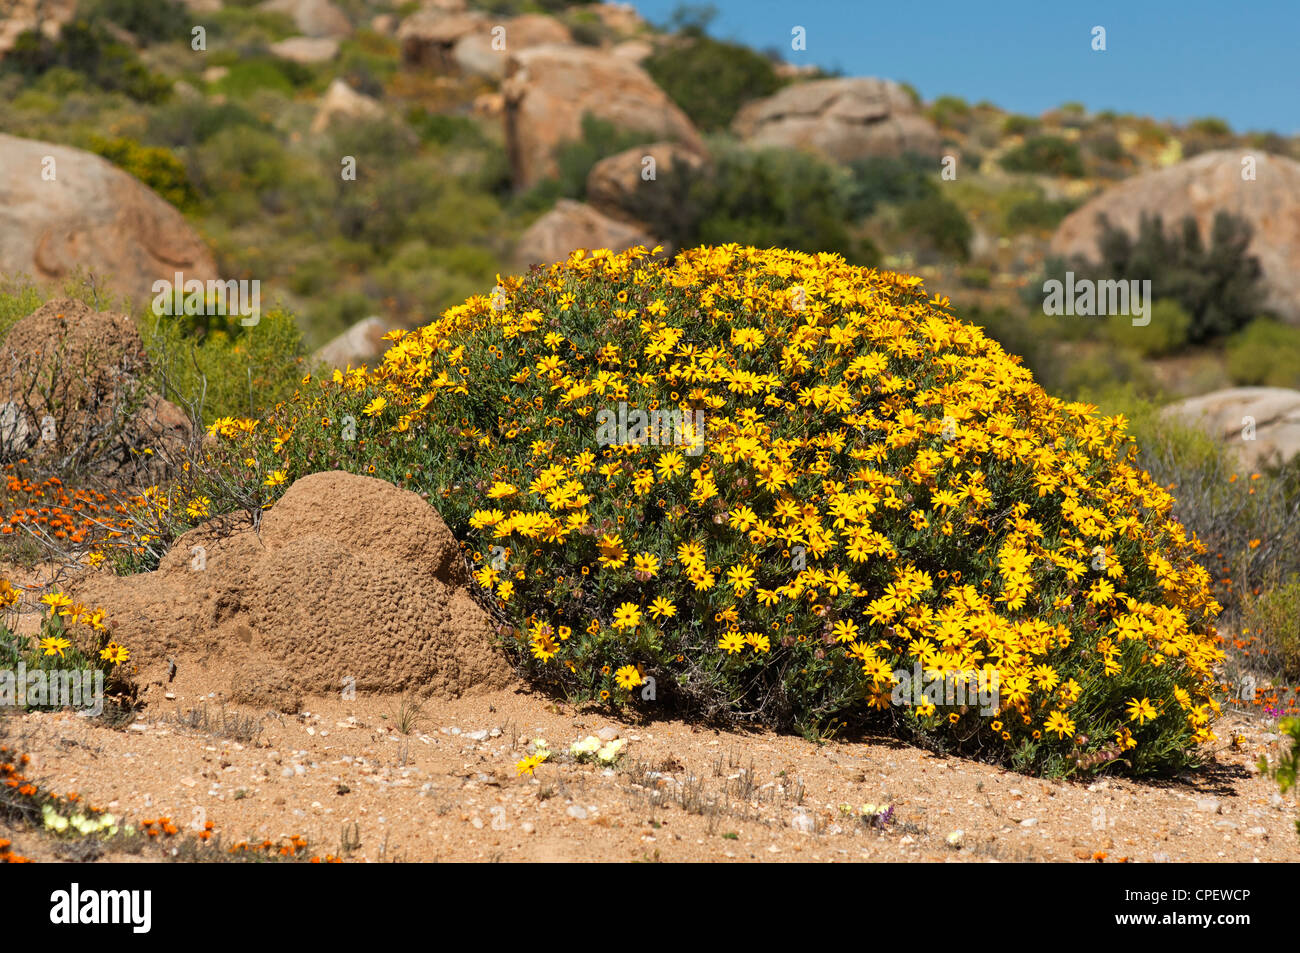 Yellow-flowering shrub of Skaapbos, Tripteris oppositifolia, Namaqualand, Northern Cape province, South Africa Stock Photo